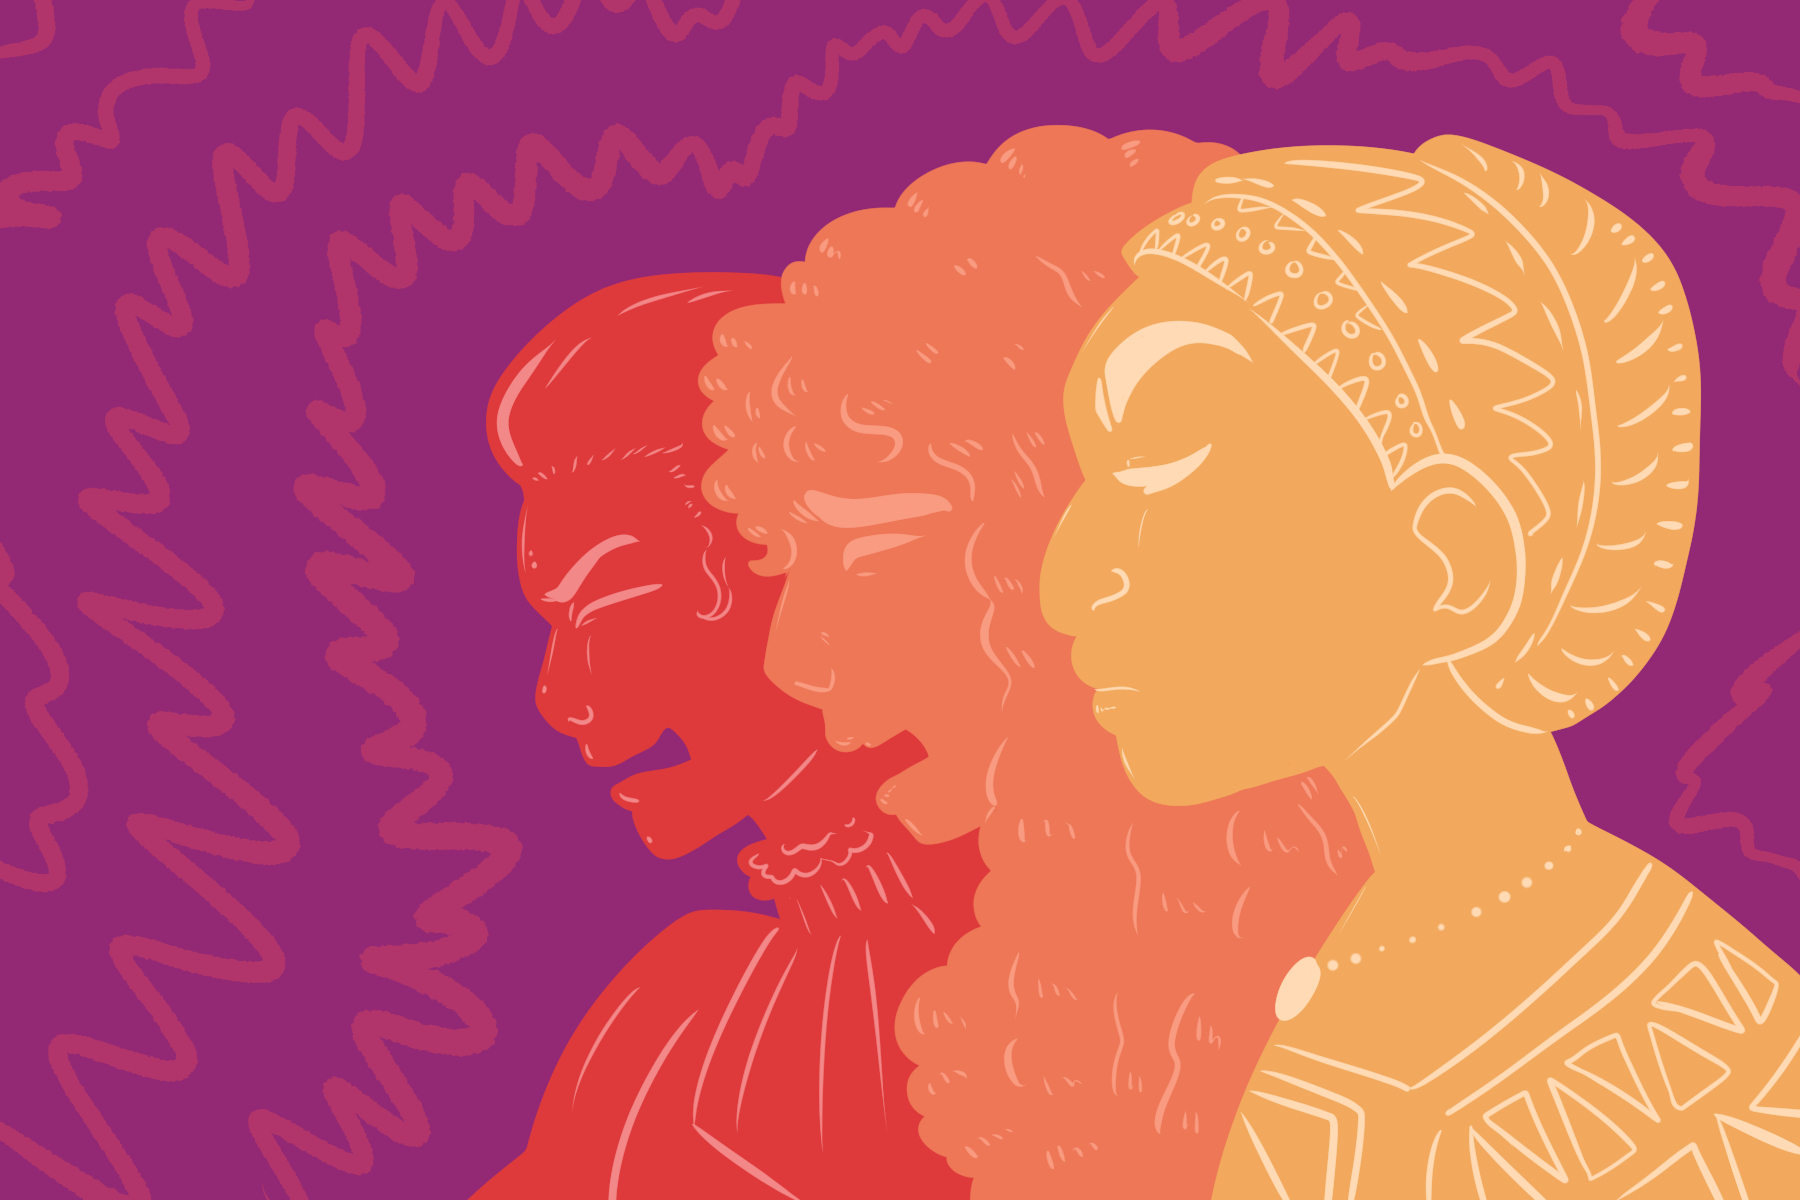 In an article about female hysteria, three colorful silhouettes of ancient Greek goddesses evoke anger-tinged emotions.